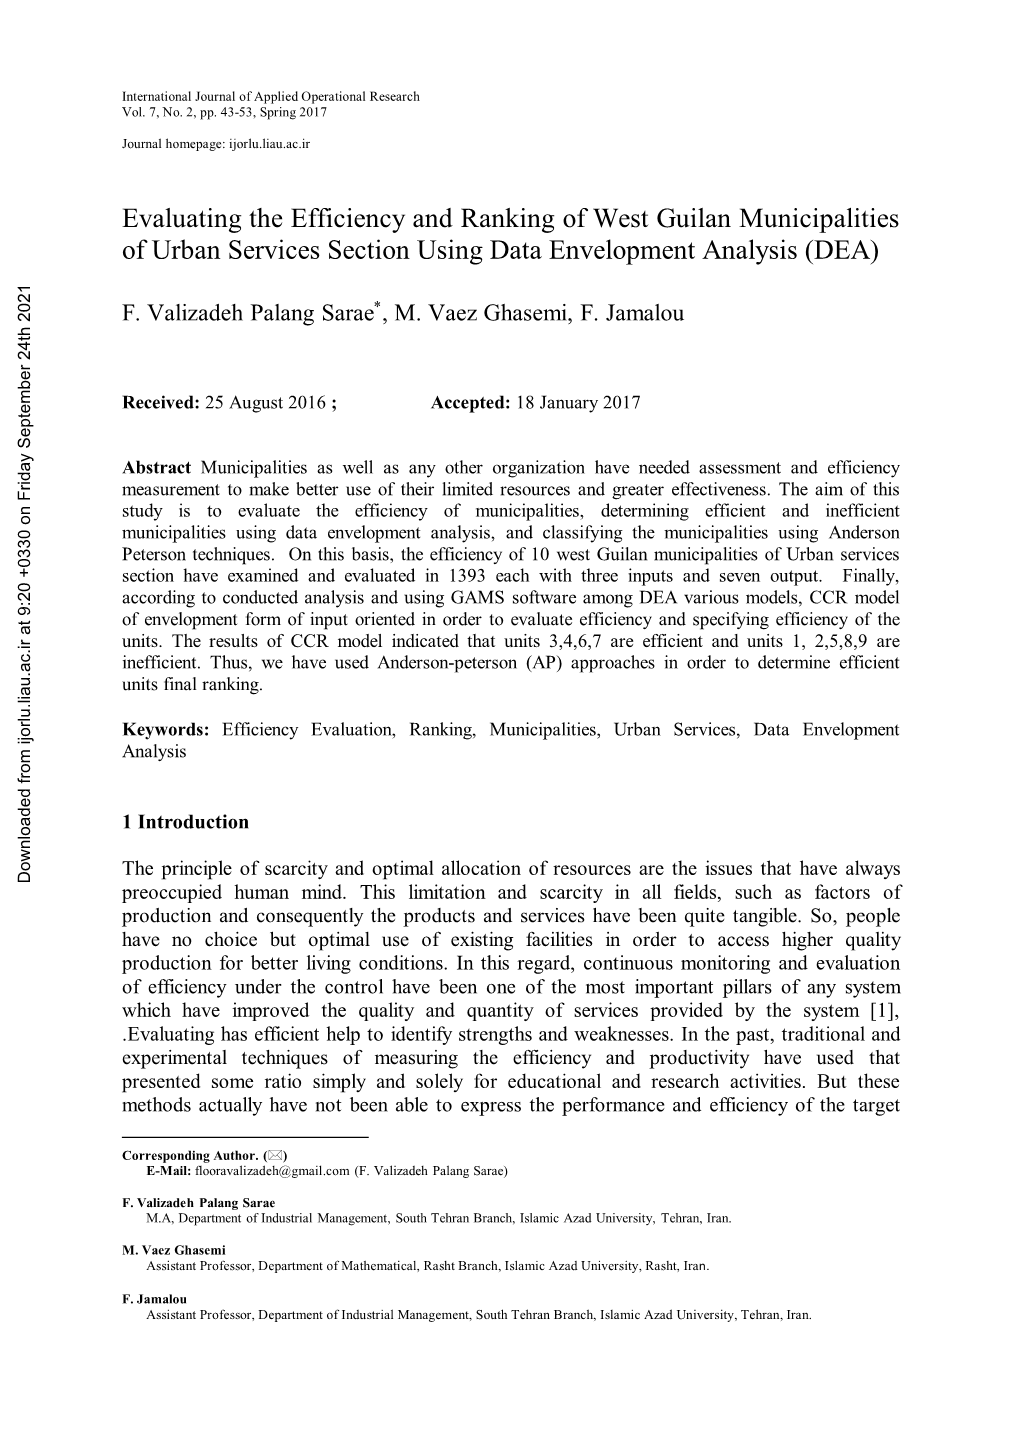 Evaluating the Efficiency and Ranking of West Guilan Municipalities of Urban Services Section Using Data Envelopment Analysis (DEA)